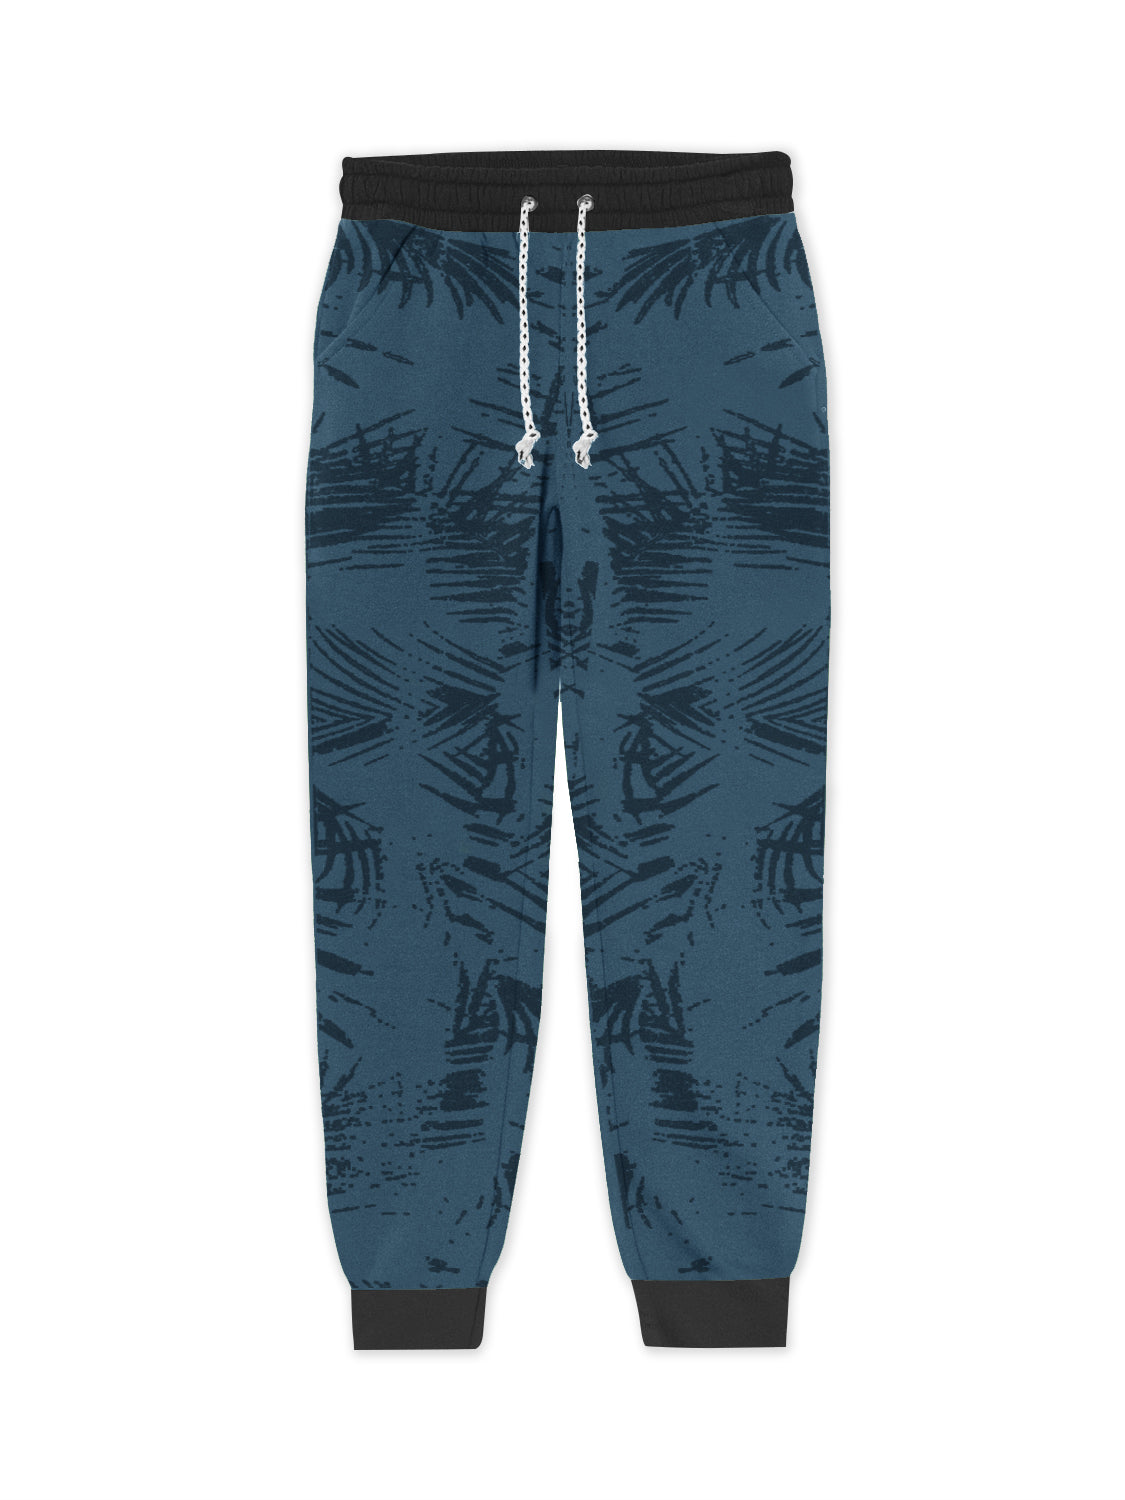 Red Pearl Terry Fleece Slim Fit Jogger Trouser For Kids-Navy With Floral Print-SP910